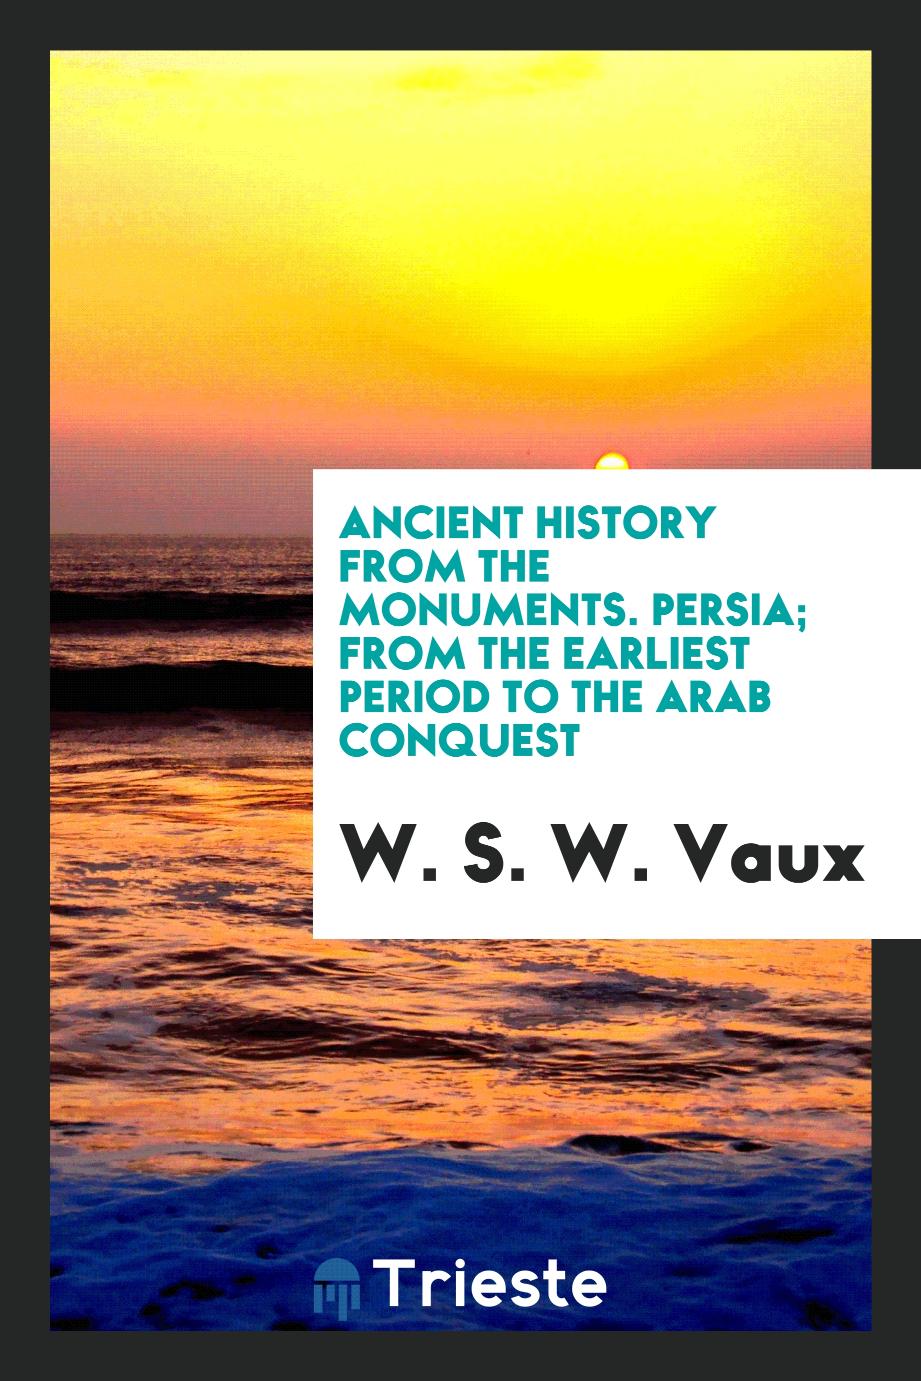 Ancient history from the monuments. Persia; from the earliest period to the Arab conquest